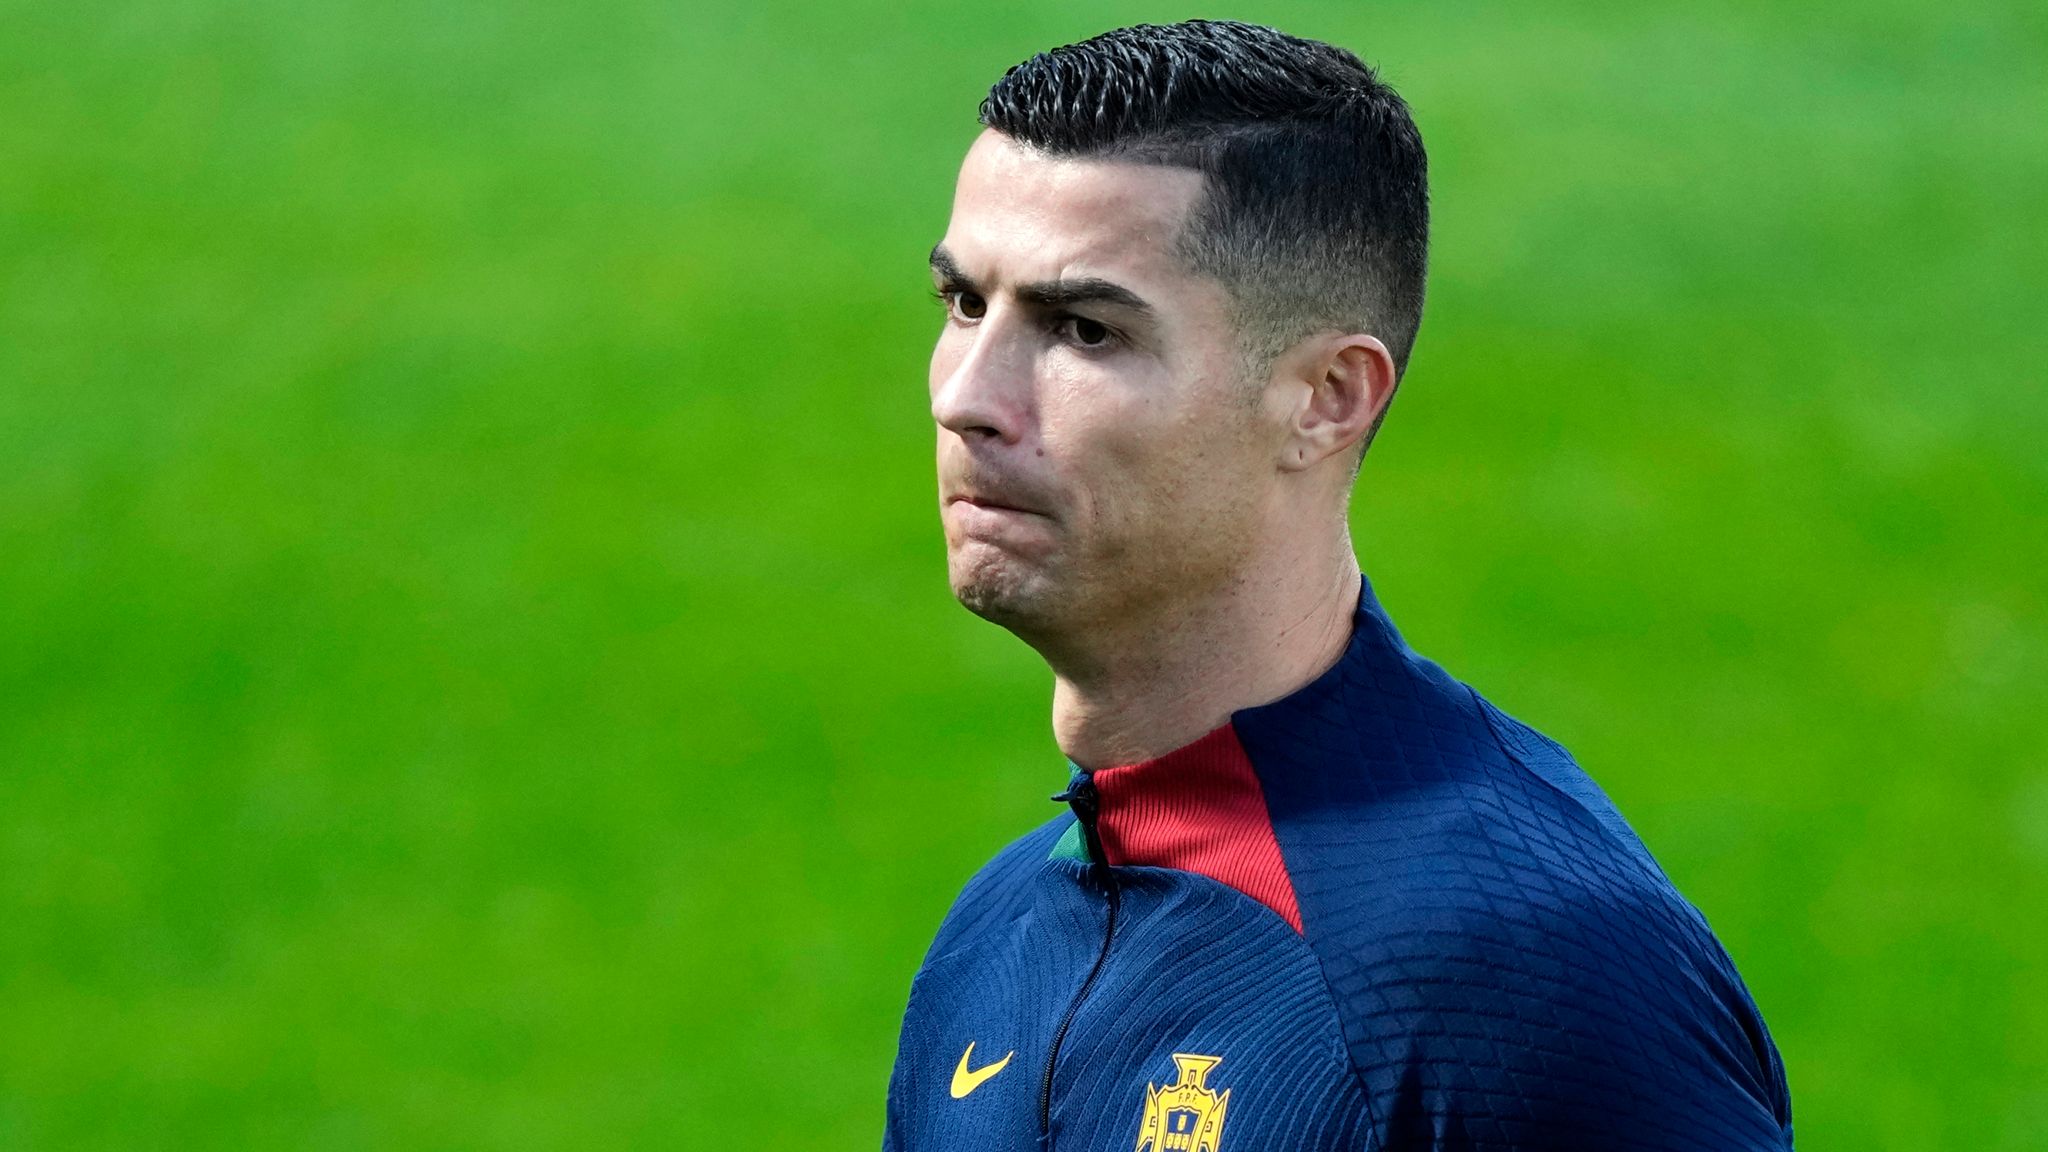 Cristiano Ronaldo may want Man United return, but Old Trafford chiefs  strike a note of pessimism - reports | Irish Independent